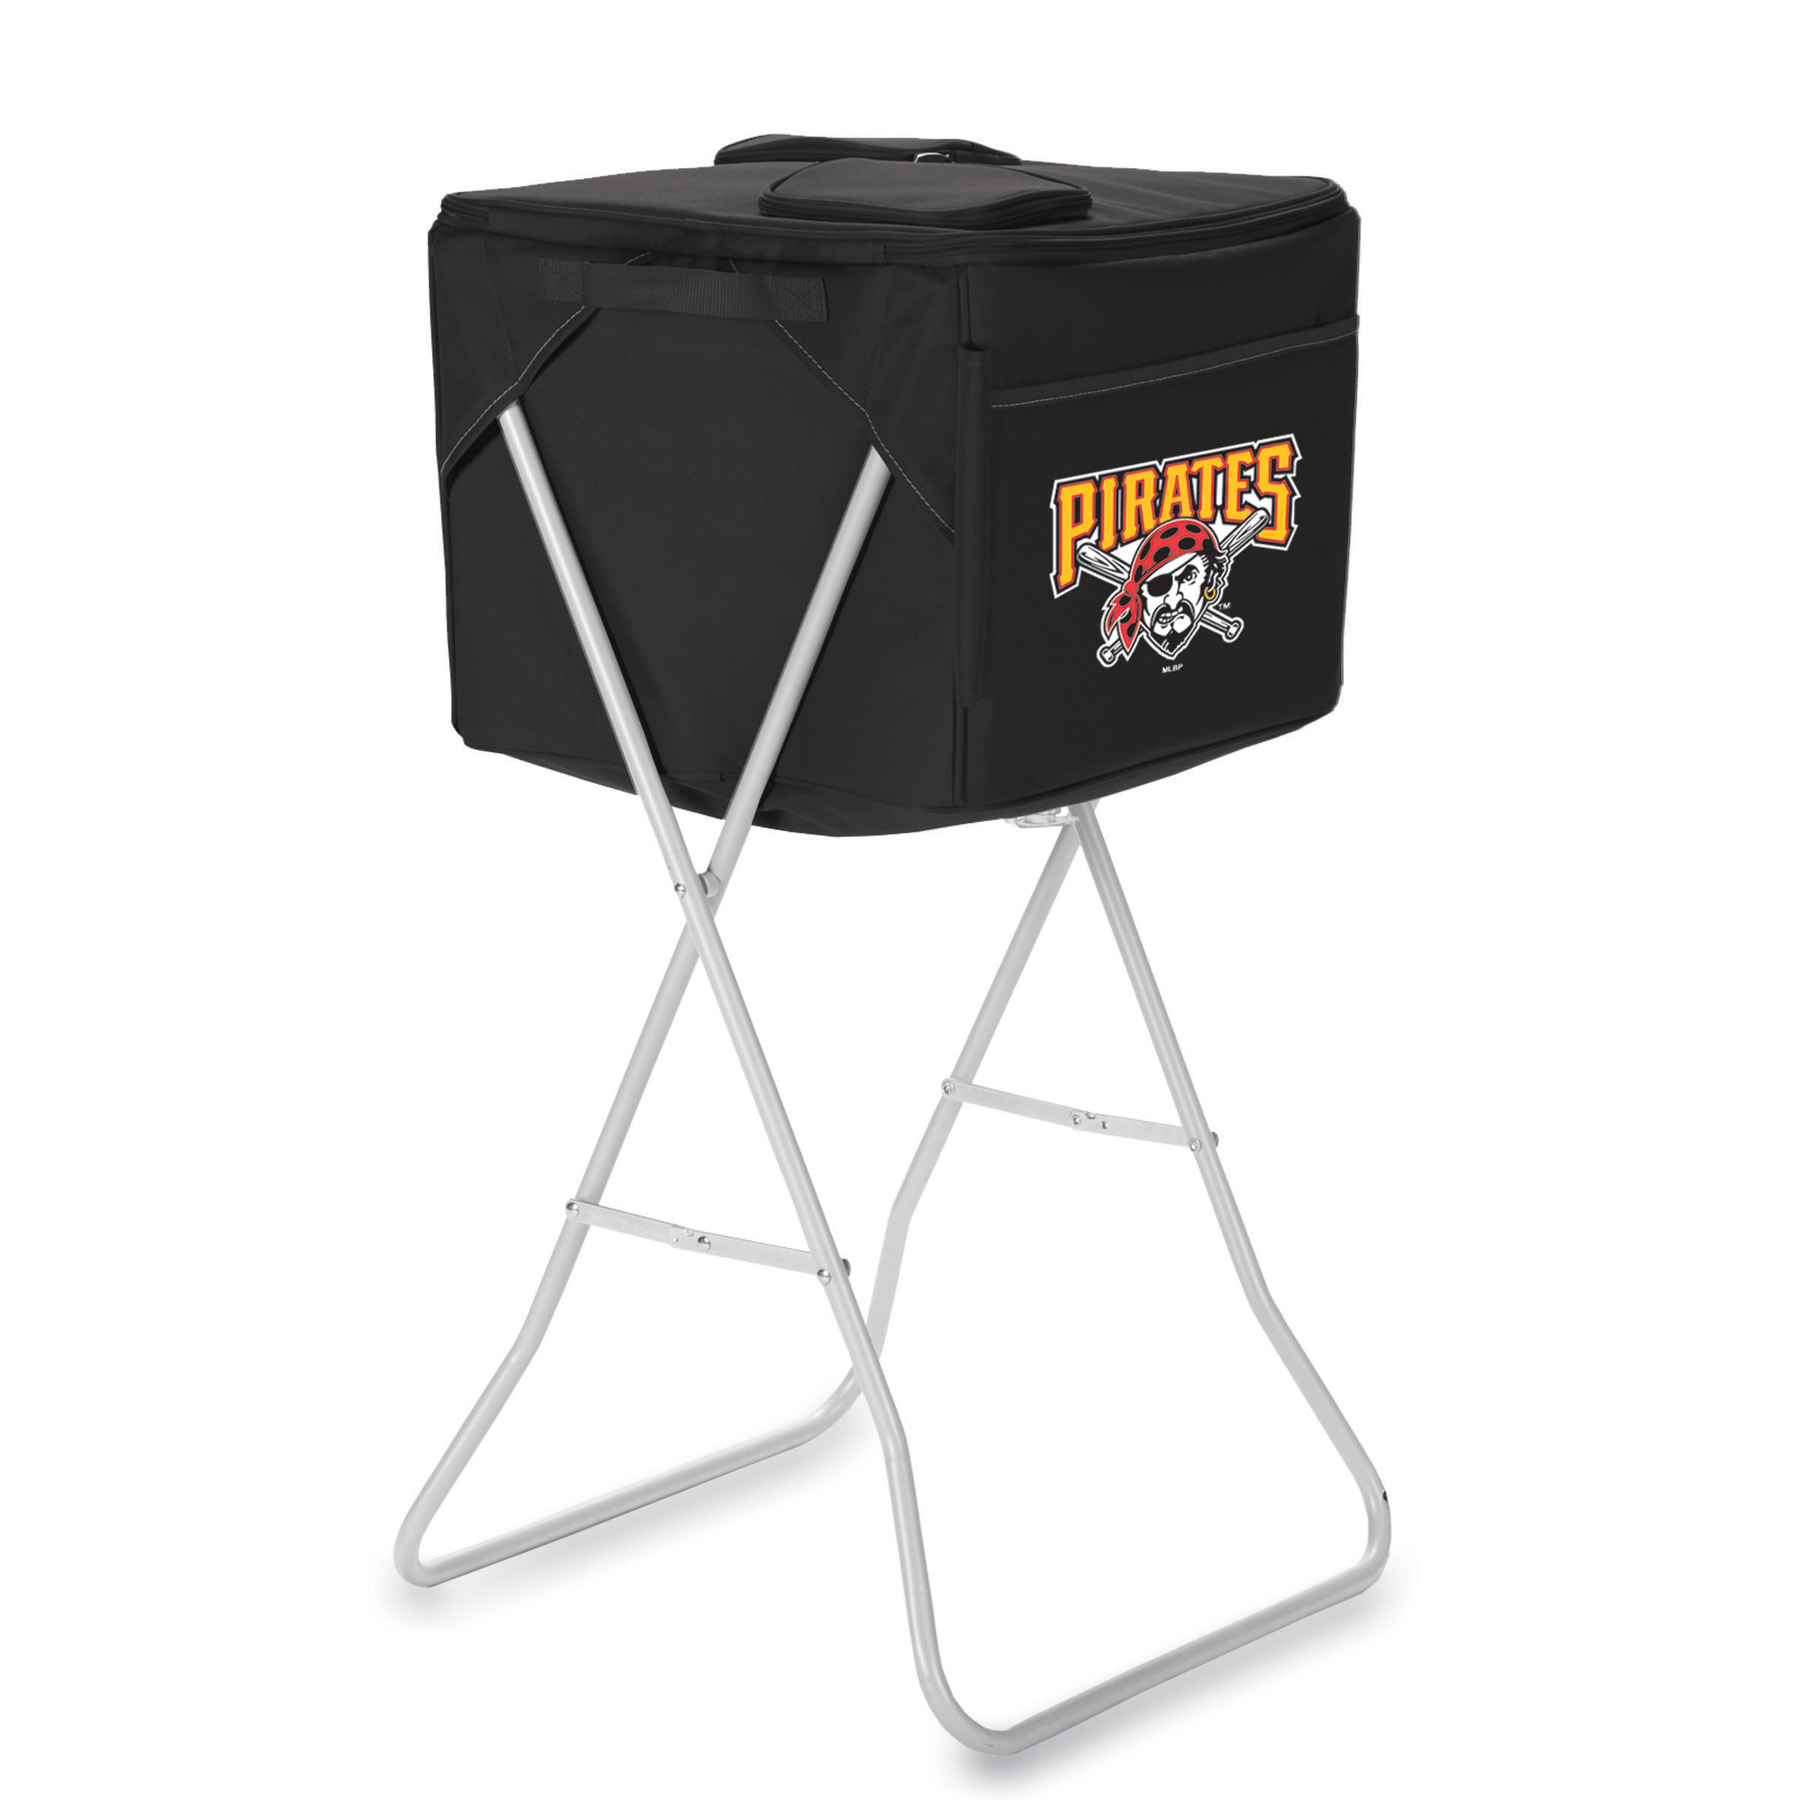 Picnic Time Party Cube Cooler - MLB - Black